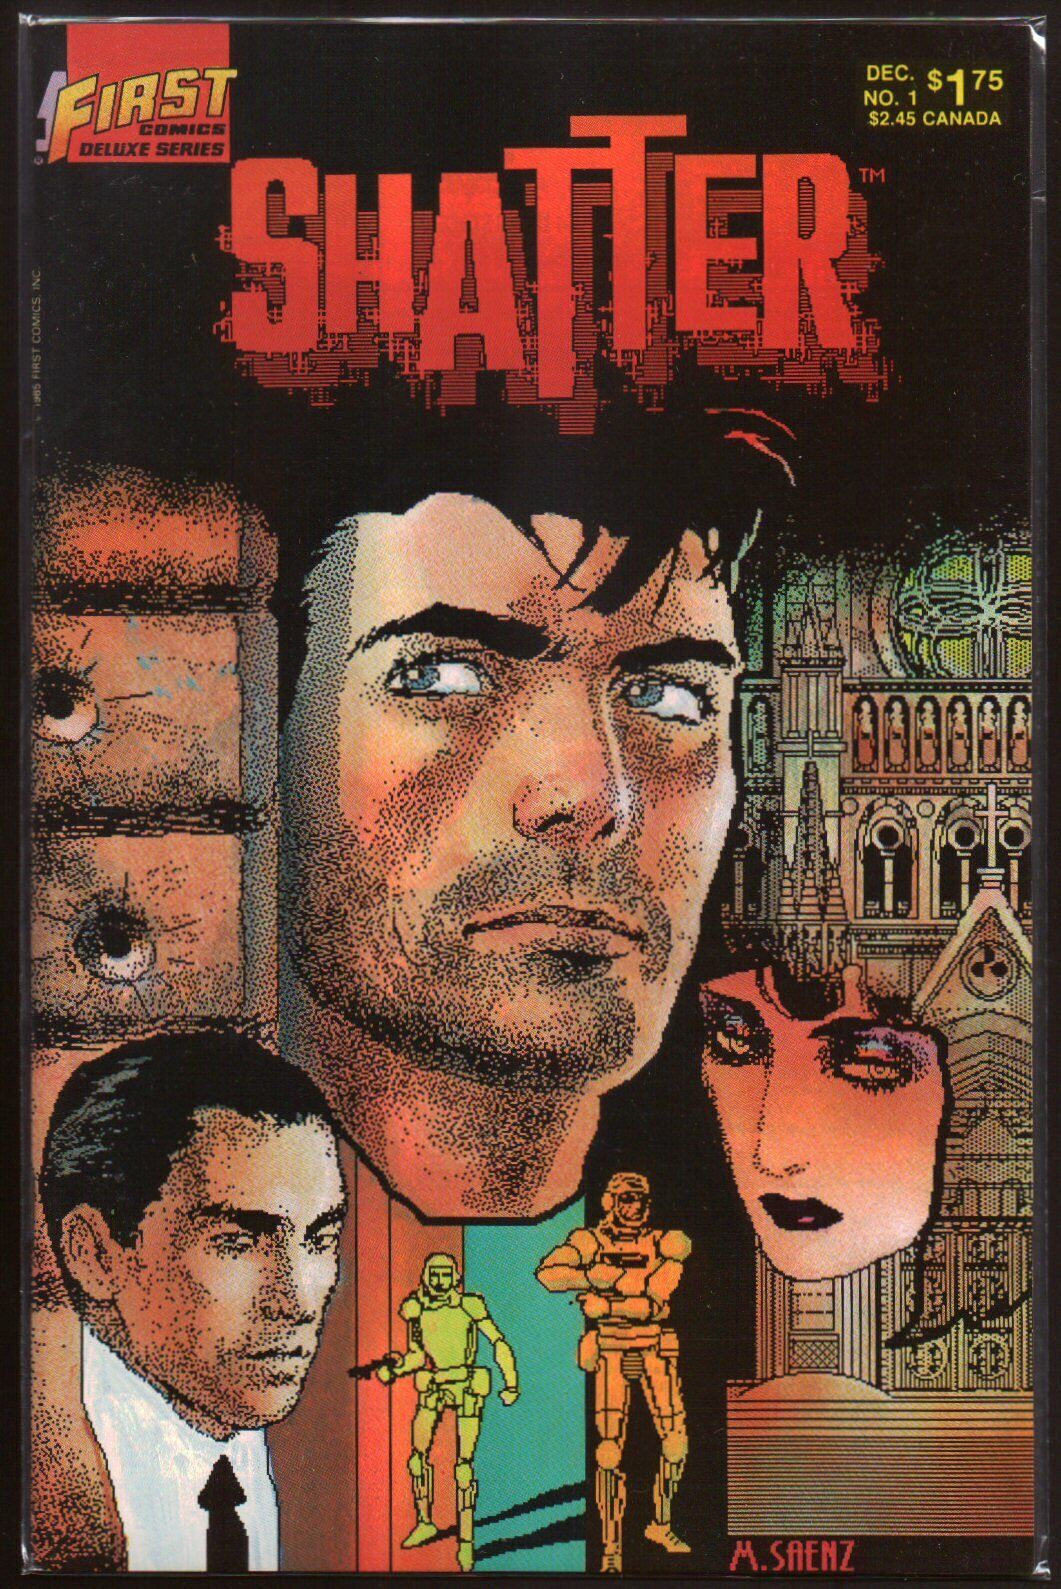 Shatter #1-10 VF/NM 9.0+ 1985-1987 First Comics Back Issues 1st Computer Digital